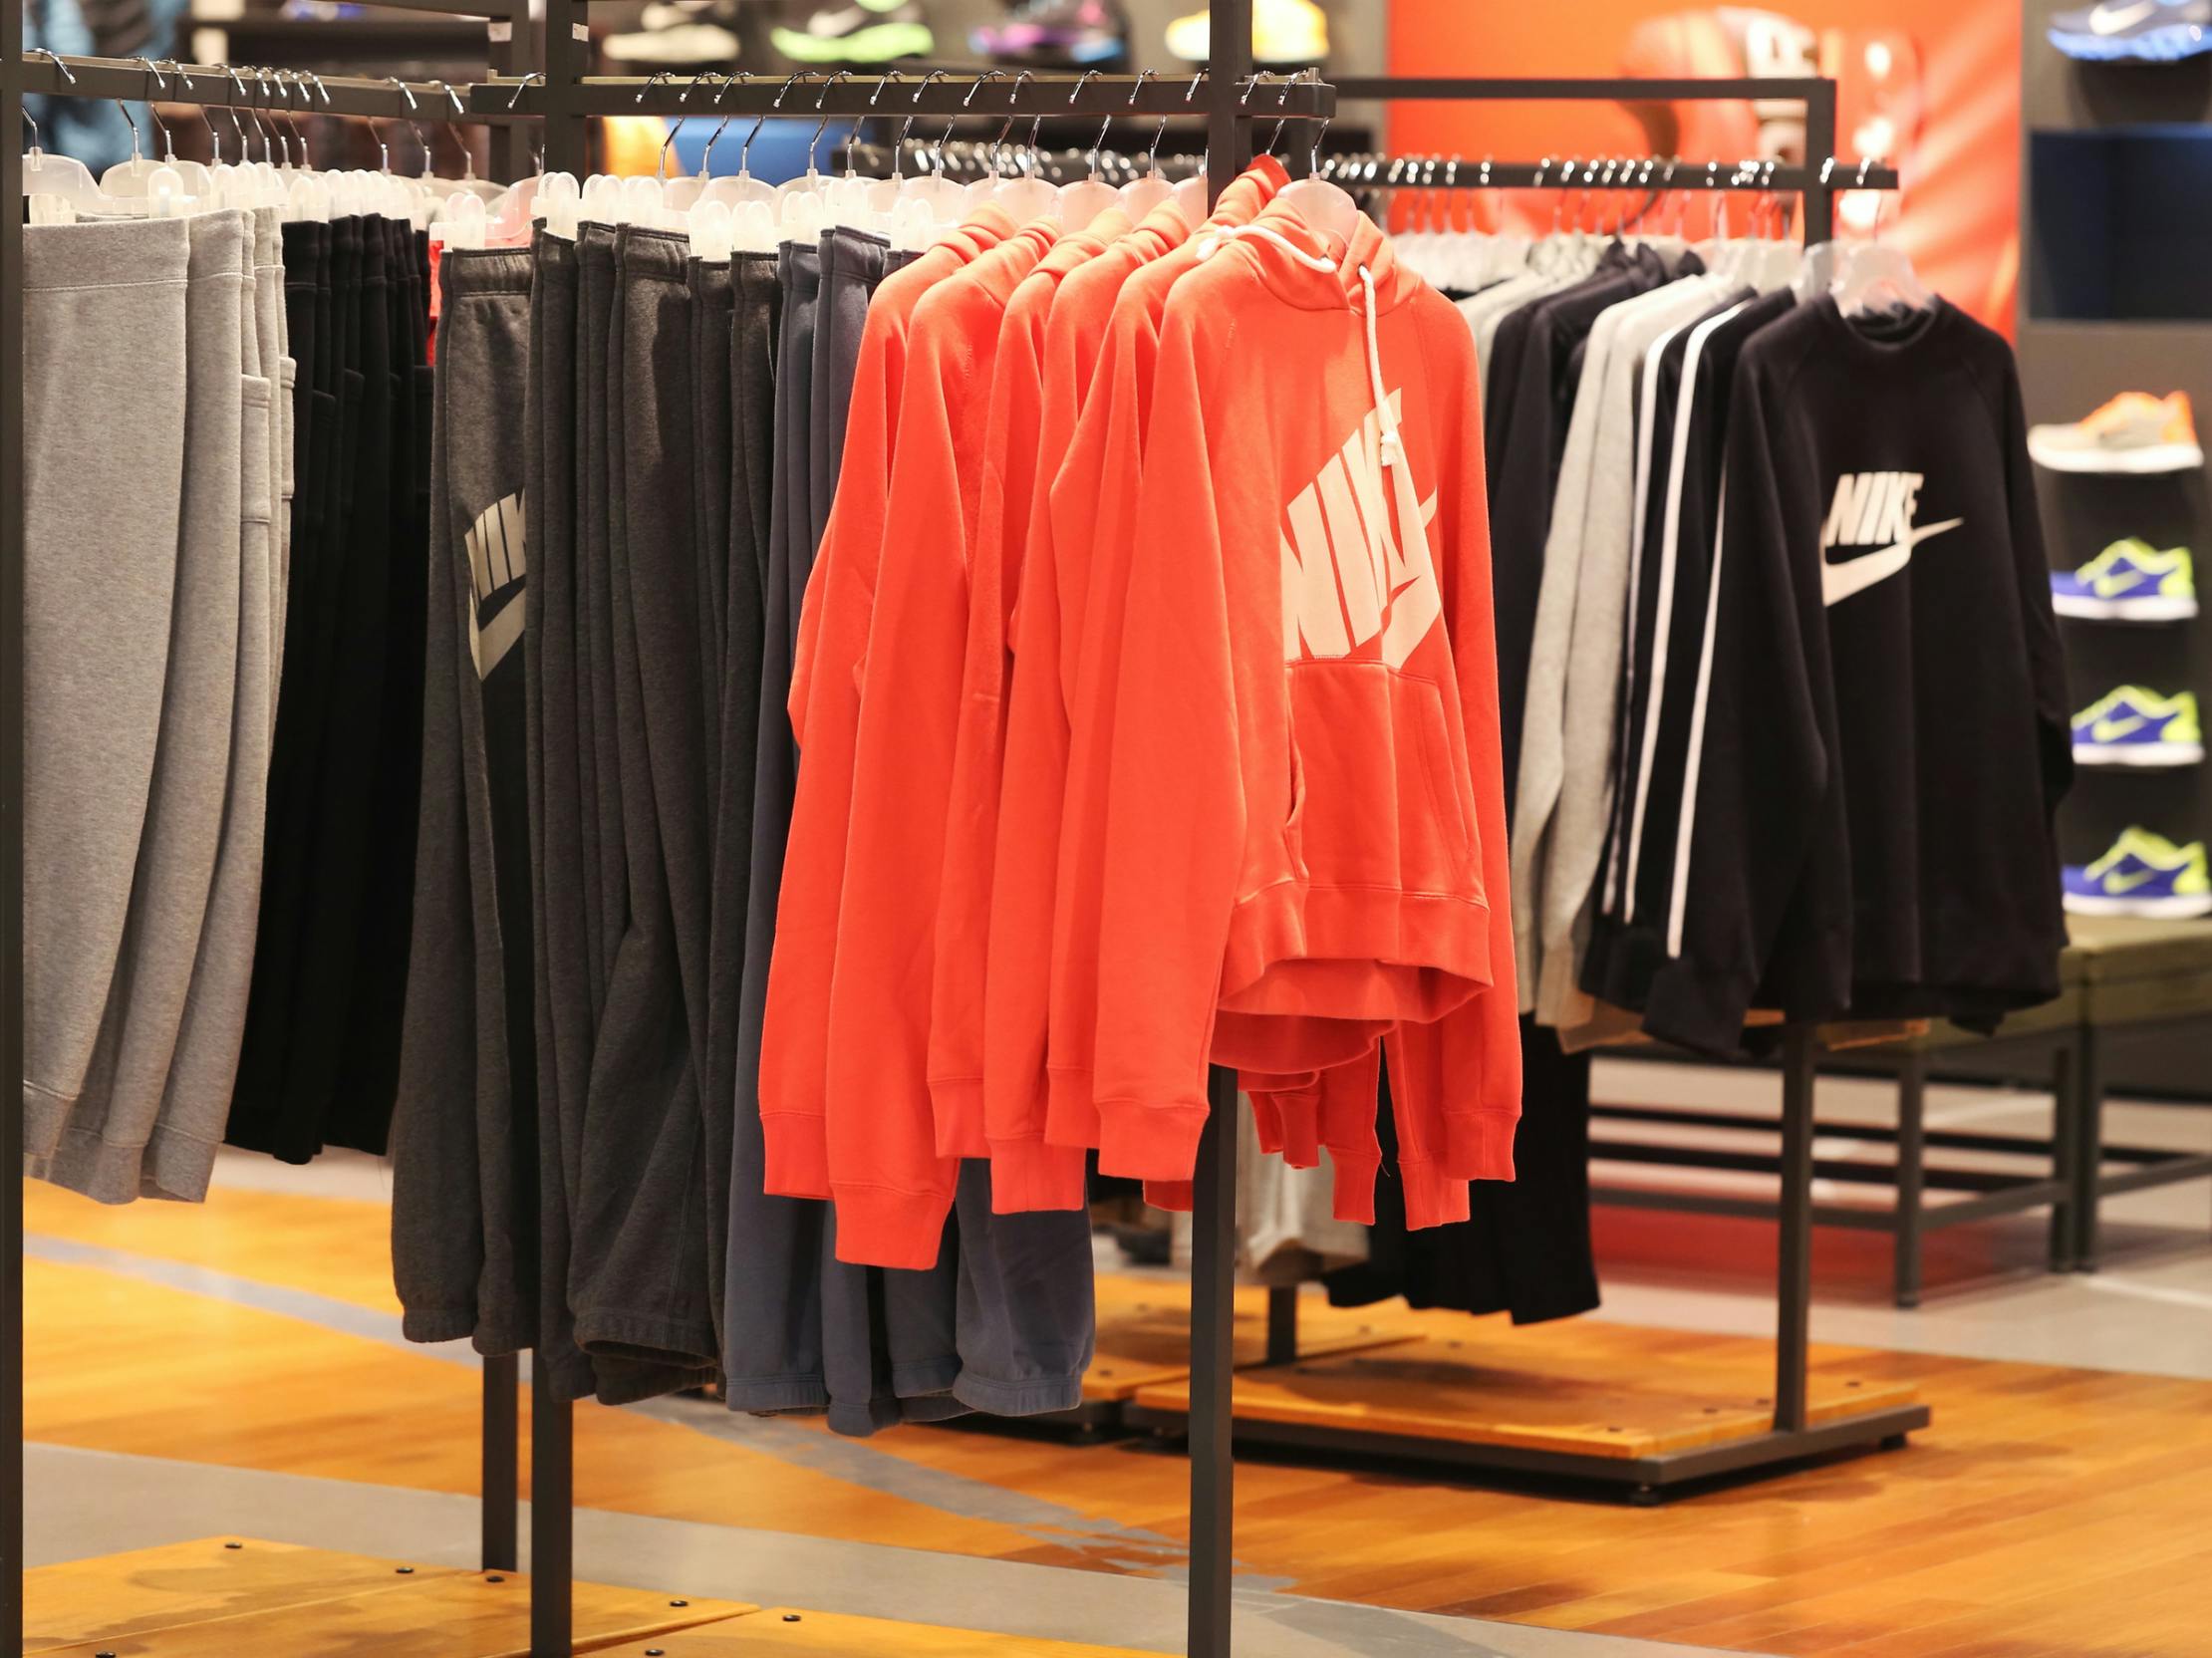 Nike sweatshirts and sweatpants hanging from a rack at the Nike store